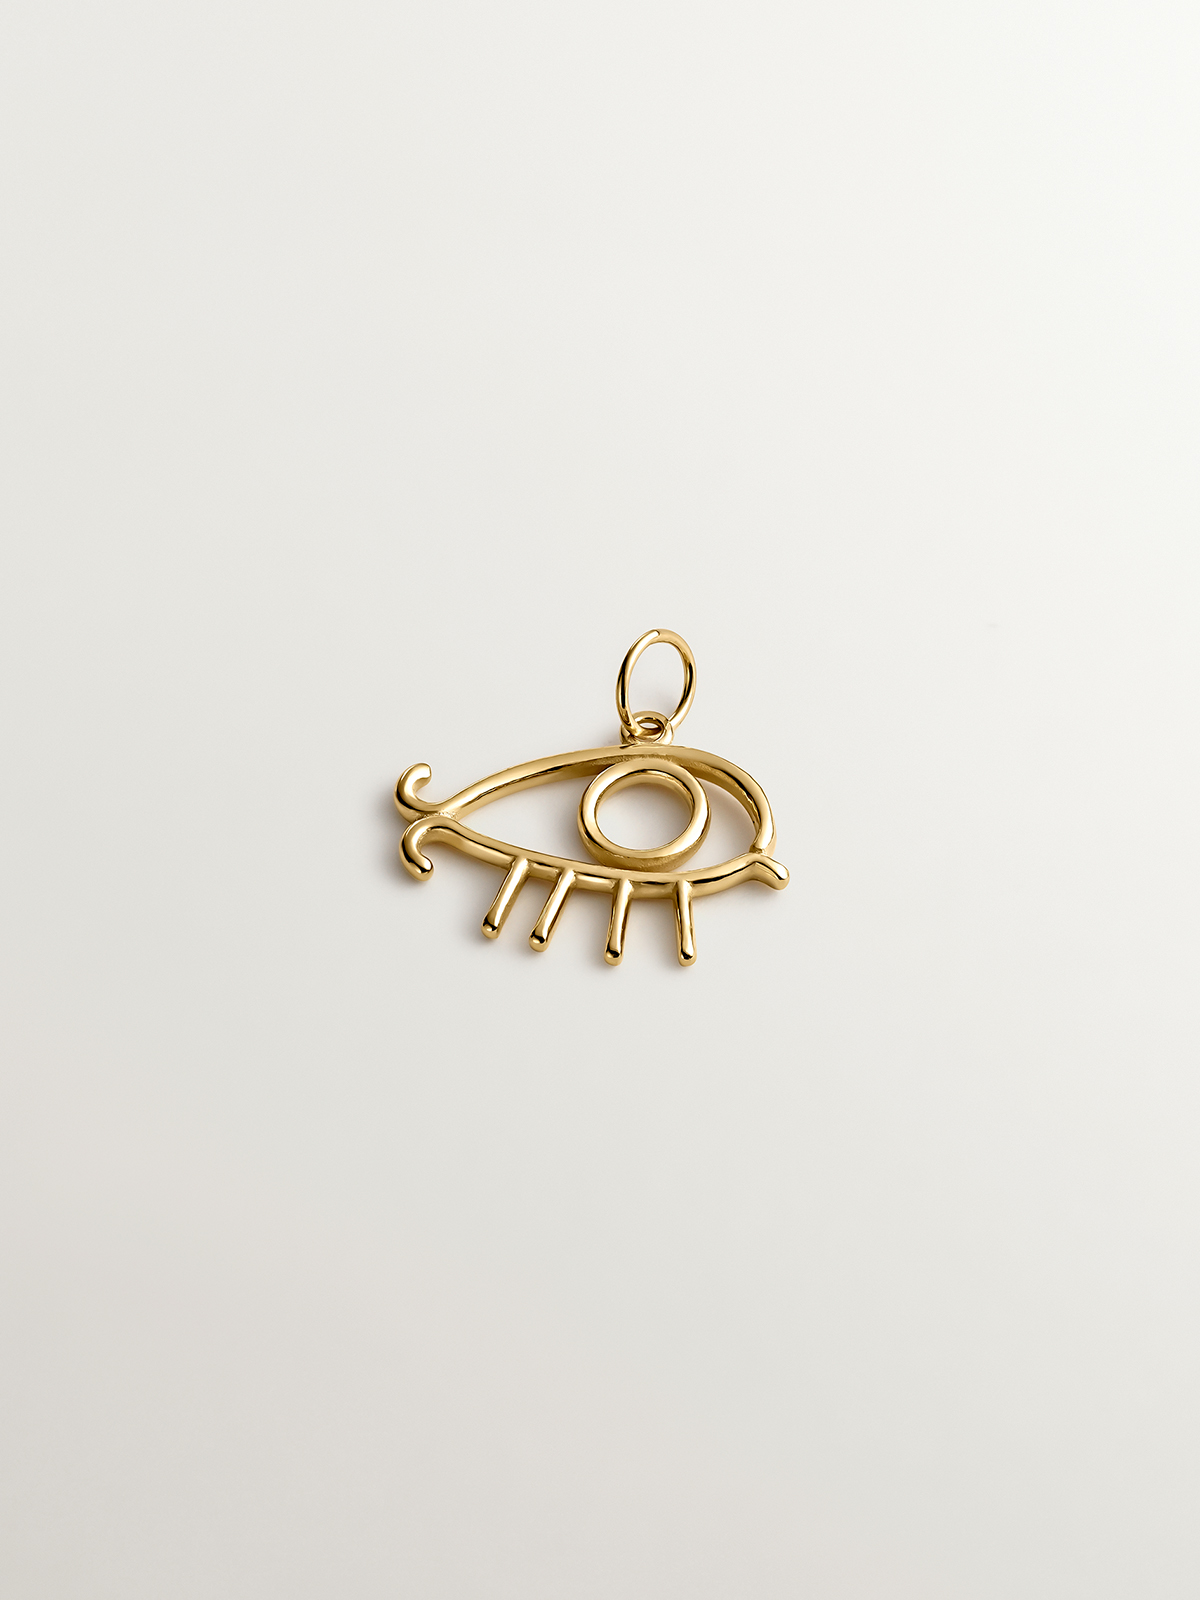 925 Silver charm bathed in 18K yellow gold with eye